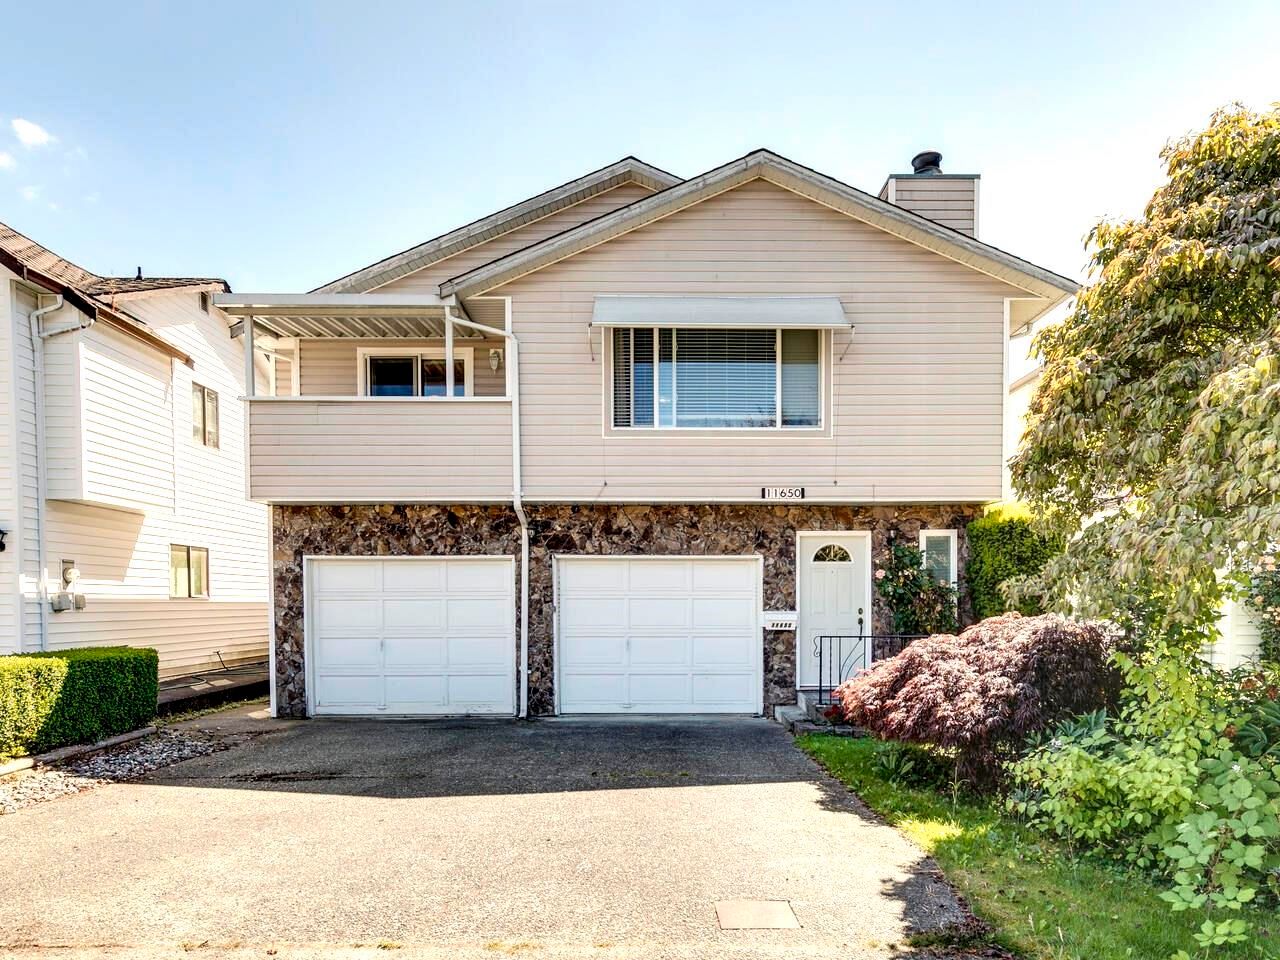 Open House on Saturday, October 22, 2022 12:00PM - 2:00PM
Offer collapsed!  1 Buyer's misfortune is about to be the answer to another Buyer's dream!  Great price, great home, great location, and so much more.  This really is one of those great buys that B